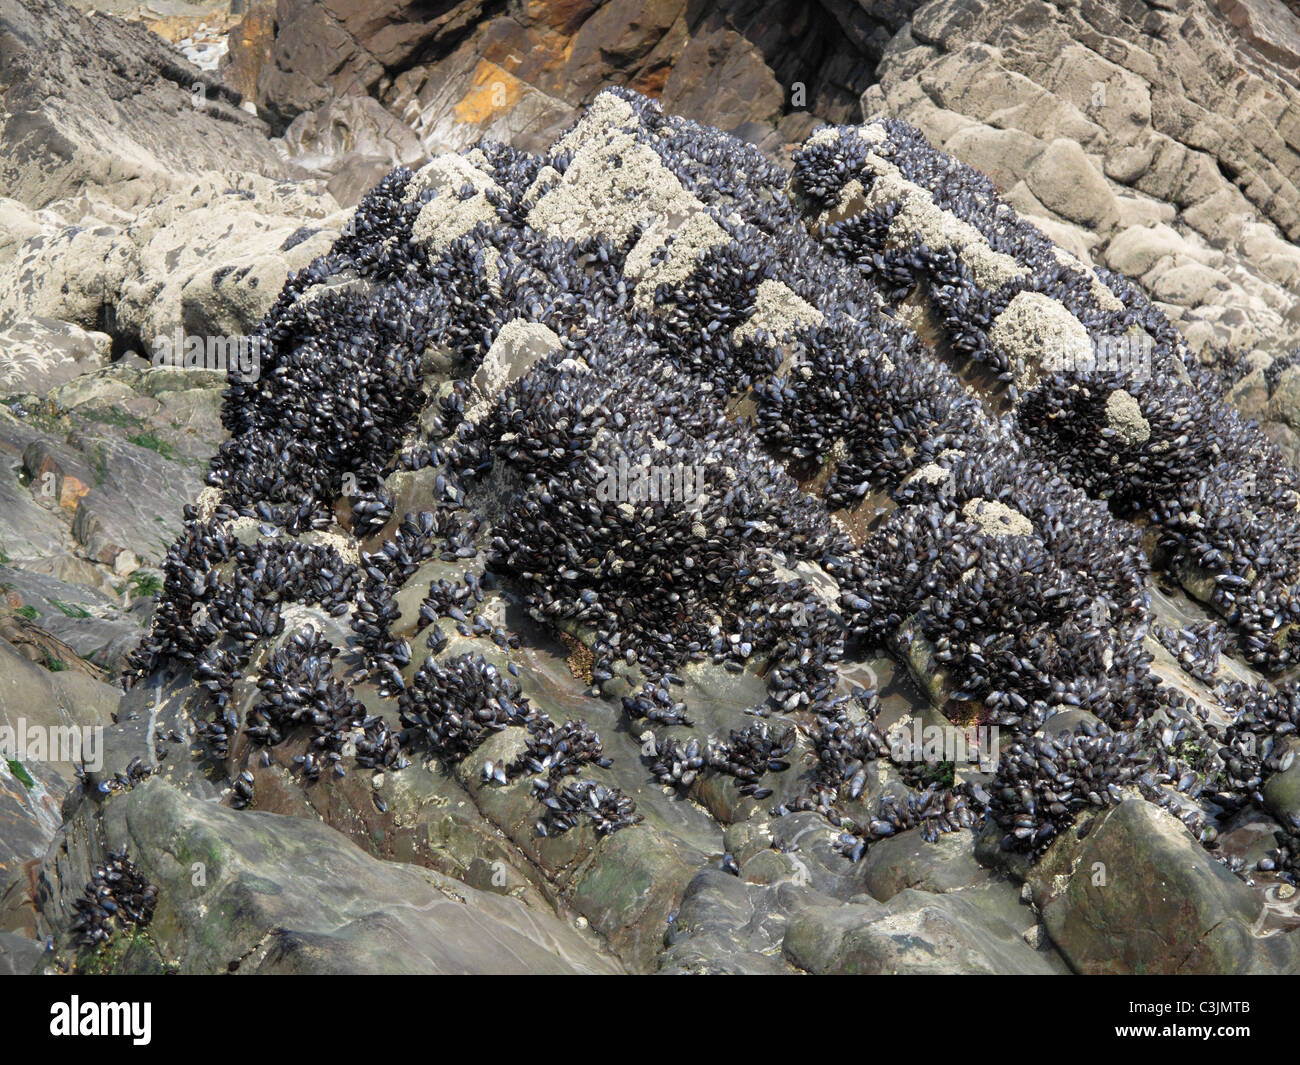 Blue mussels (Mytilus edulis) colonies in the intertidal zone on rocks at Sandymoth Bay, Cornwall Stock Photo